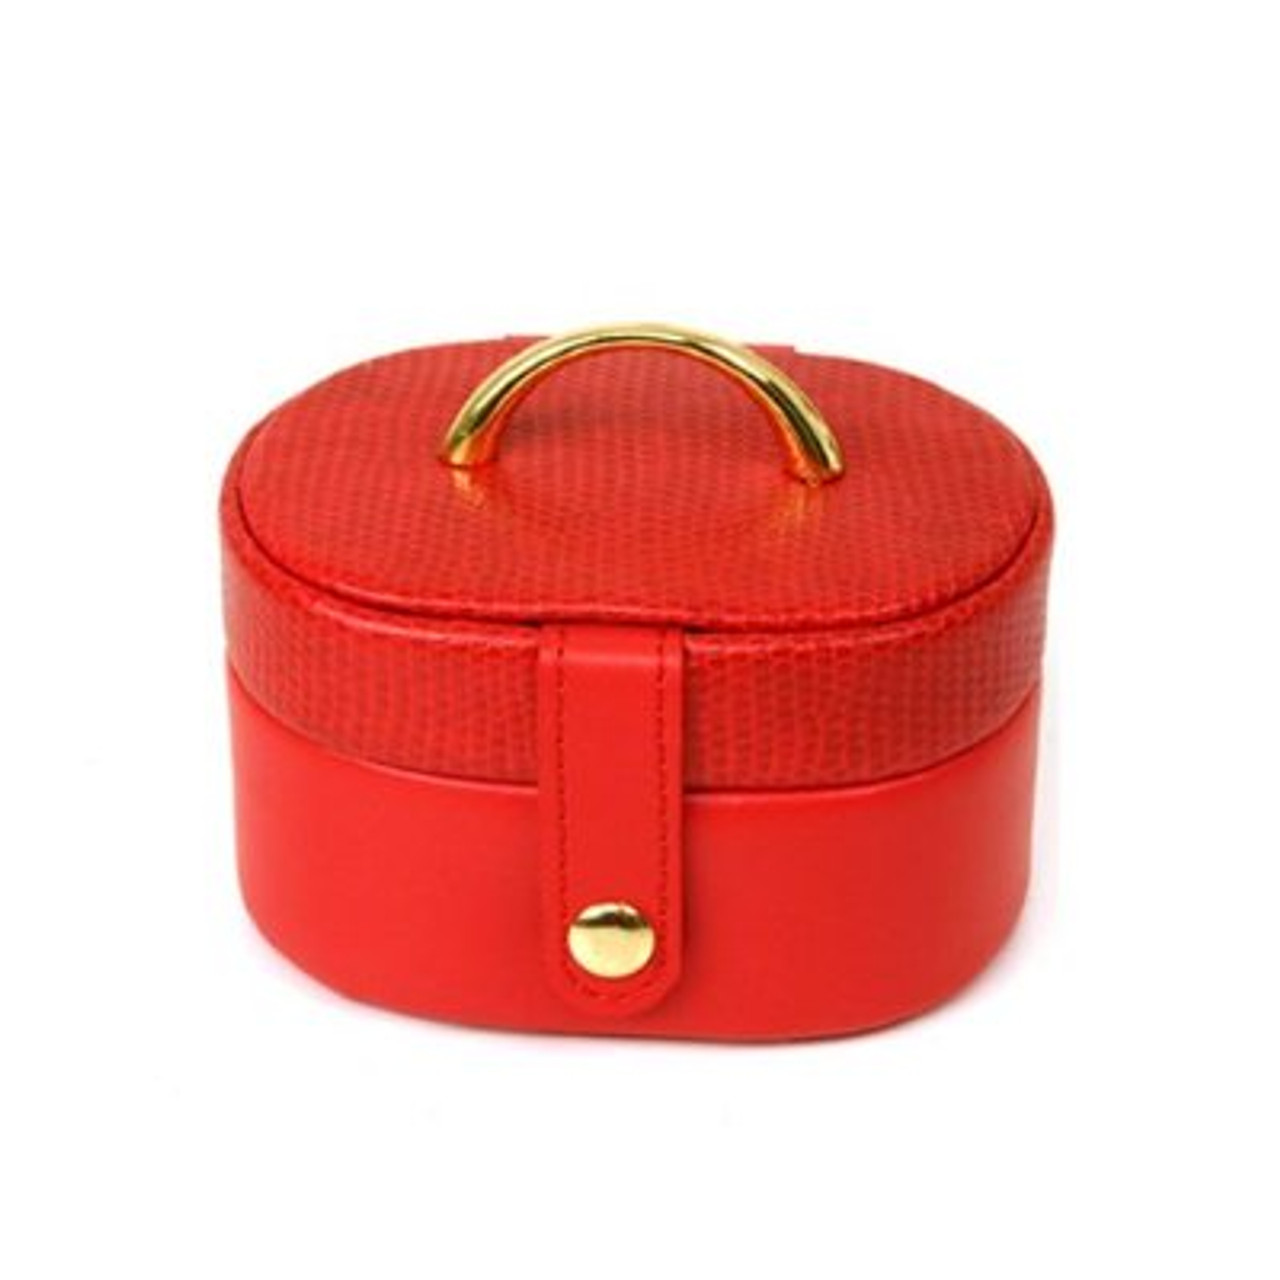 Mini Jewelry Box Set in Pink Red Orange & Bronze Leather Gift Cases  TechSwiss